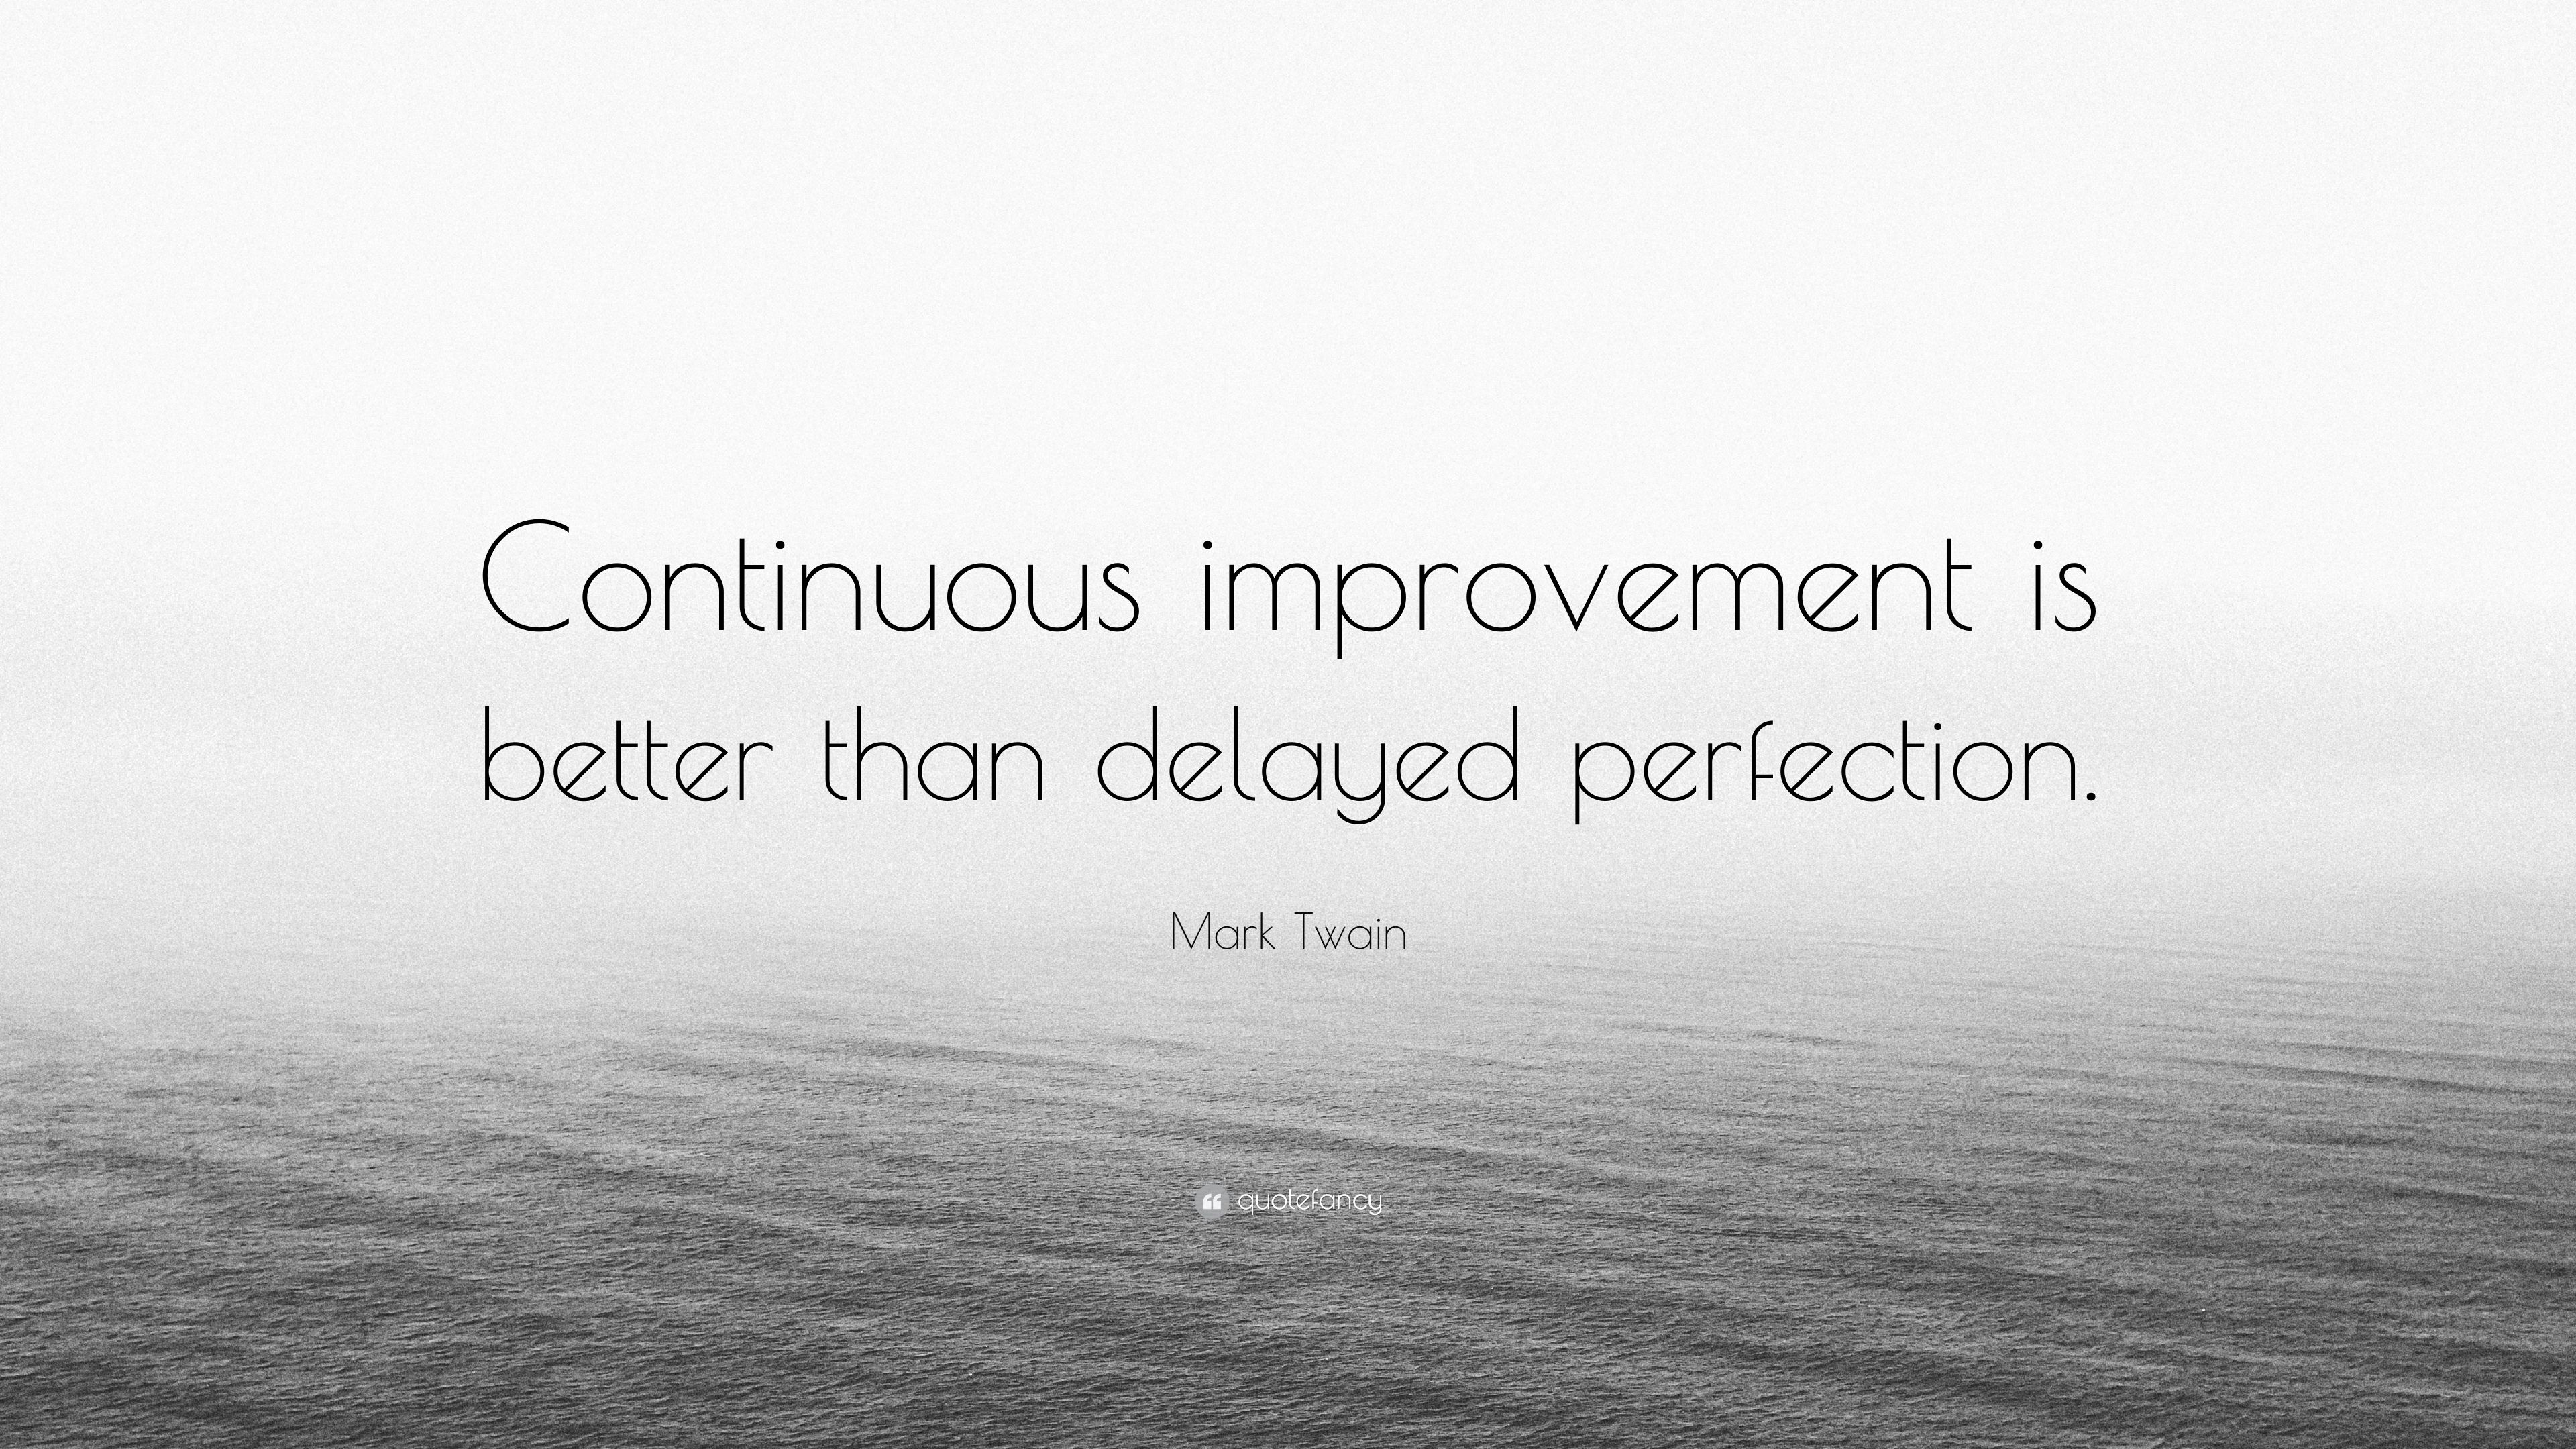 Mark Twain Quote: “Continuous improvement is better than delayed